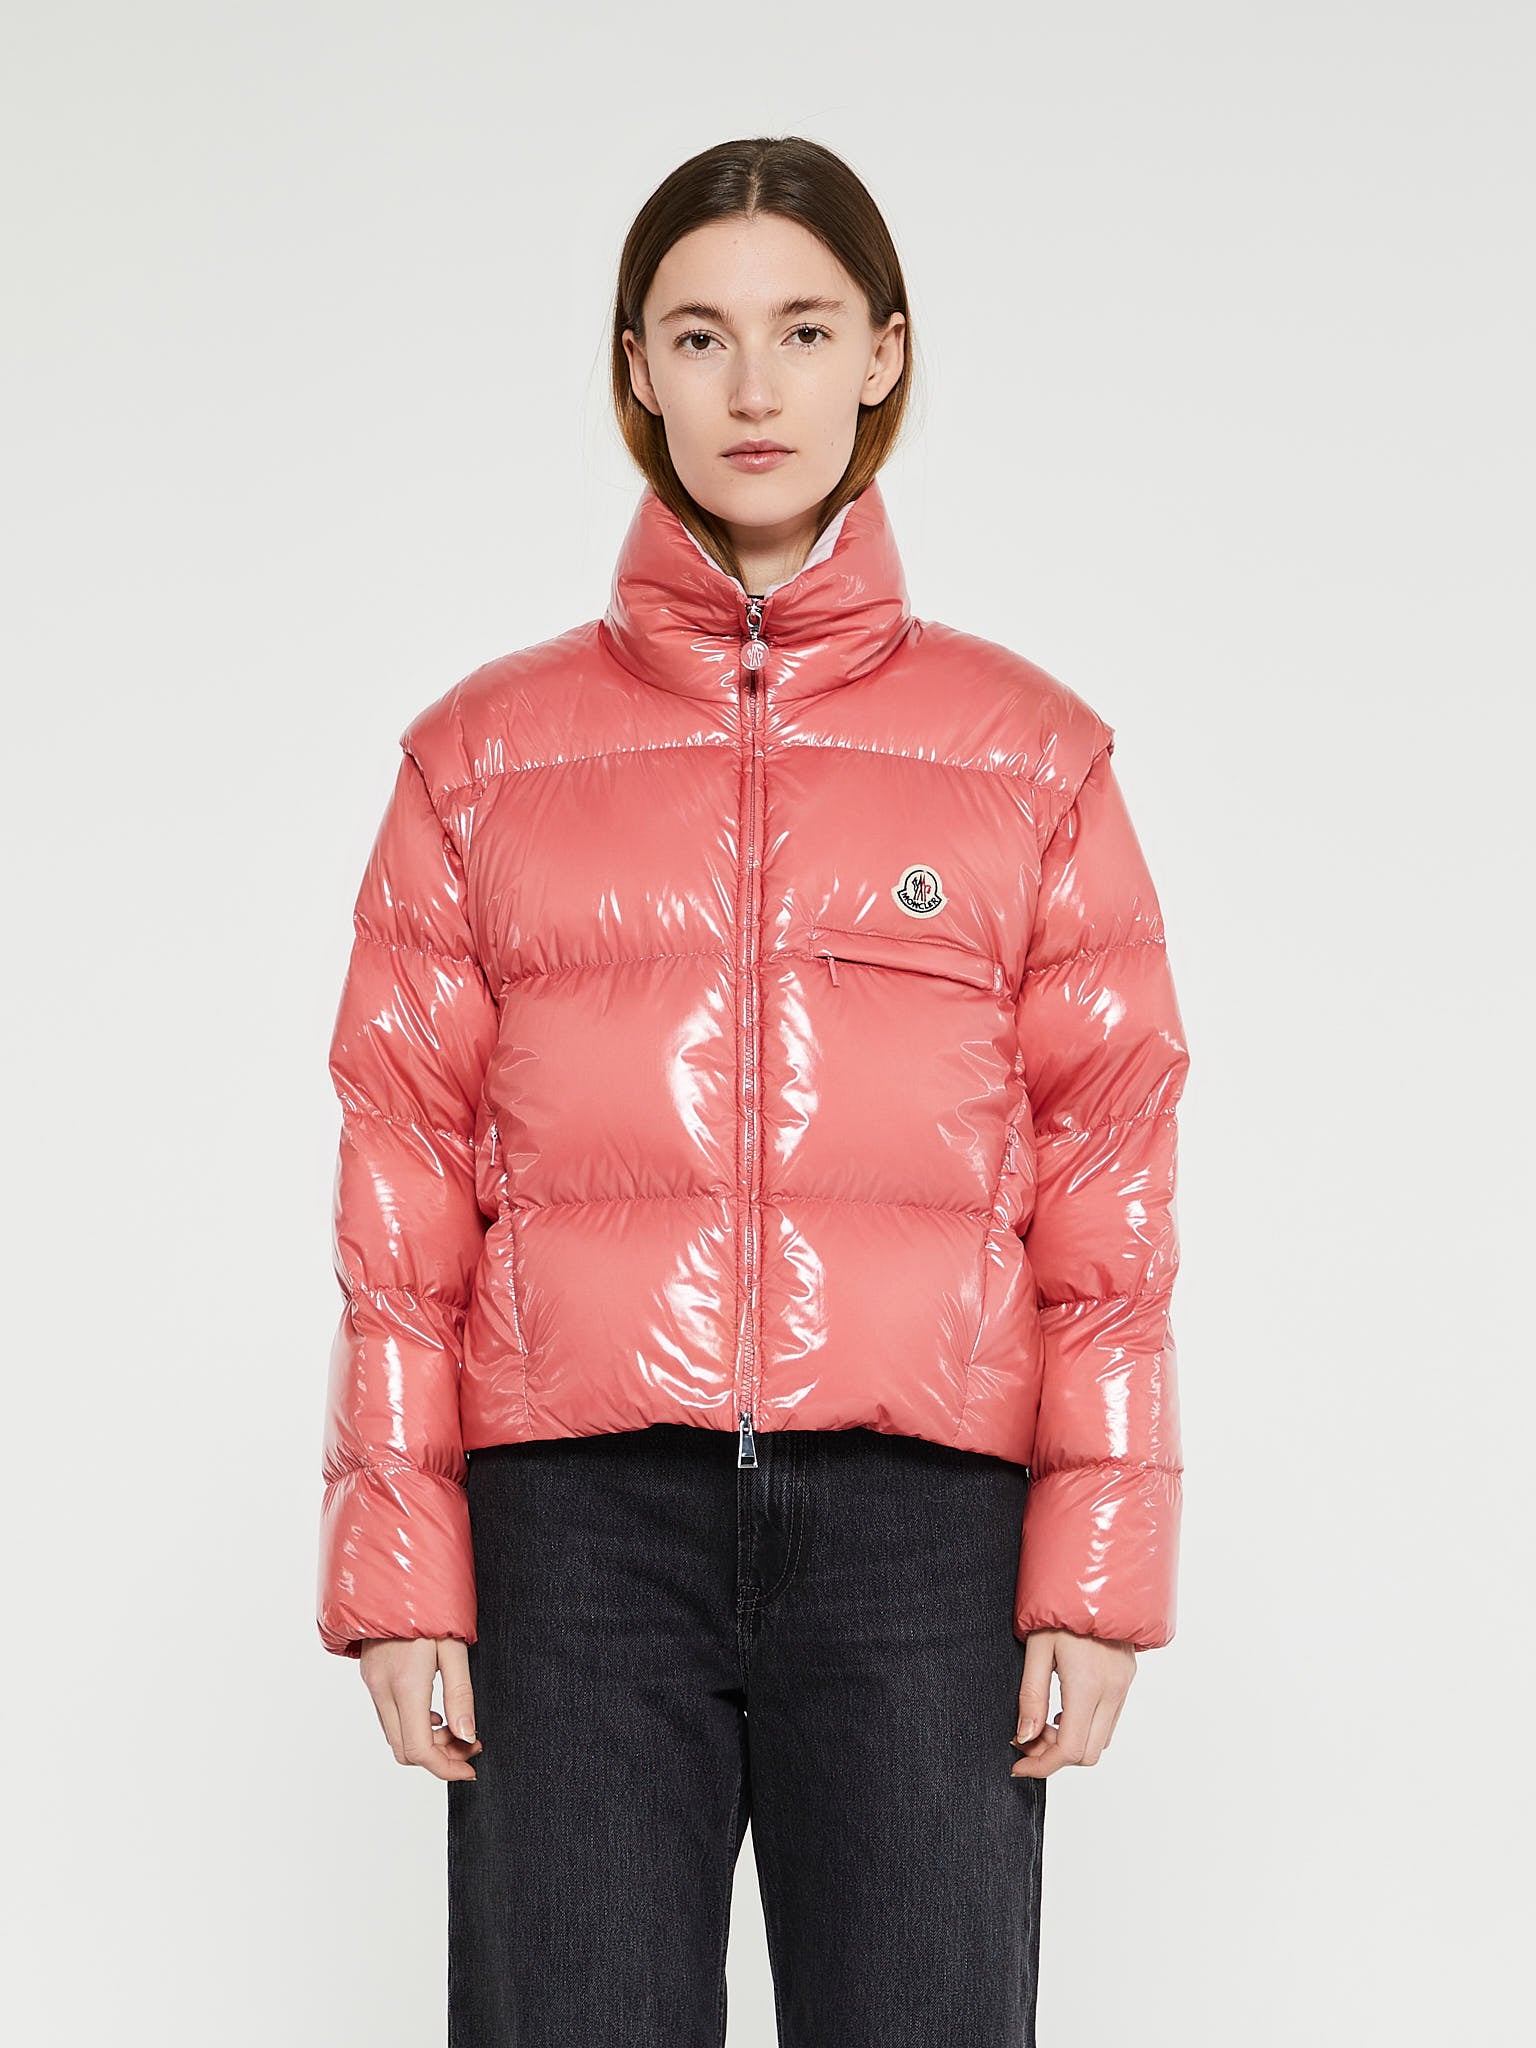 & Jackets selection women Shop stoy for | at the Coats